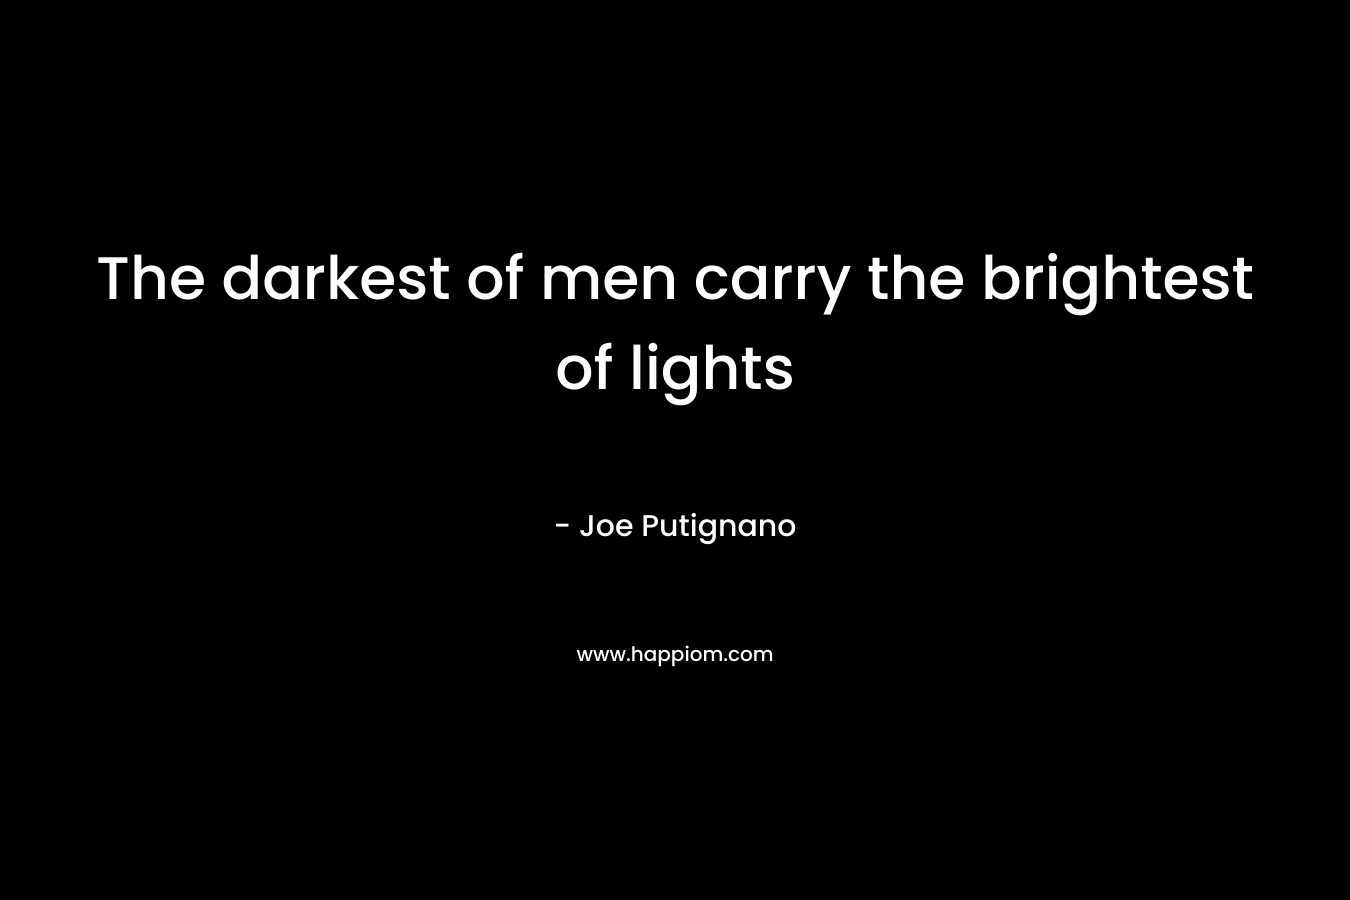 The darkest of men carry the brightest of lights